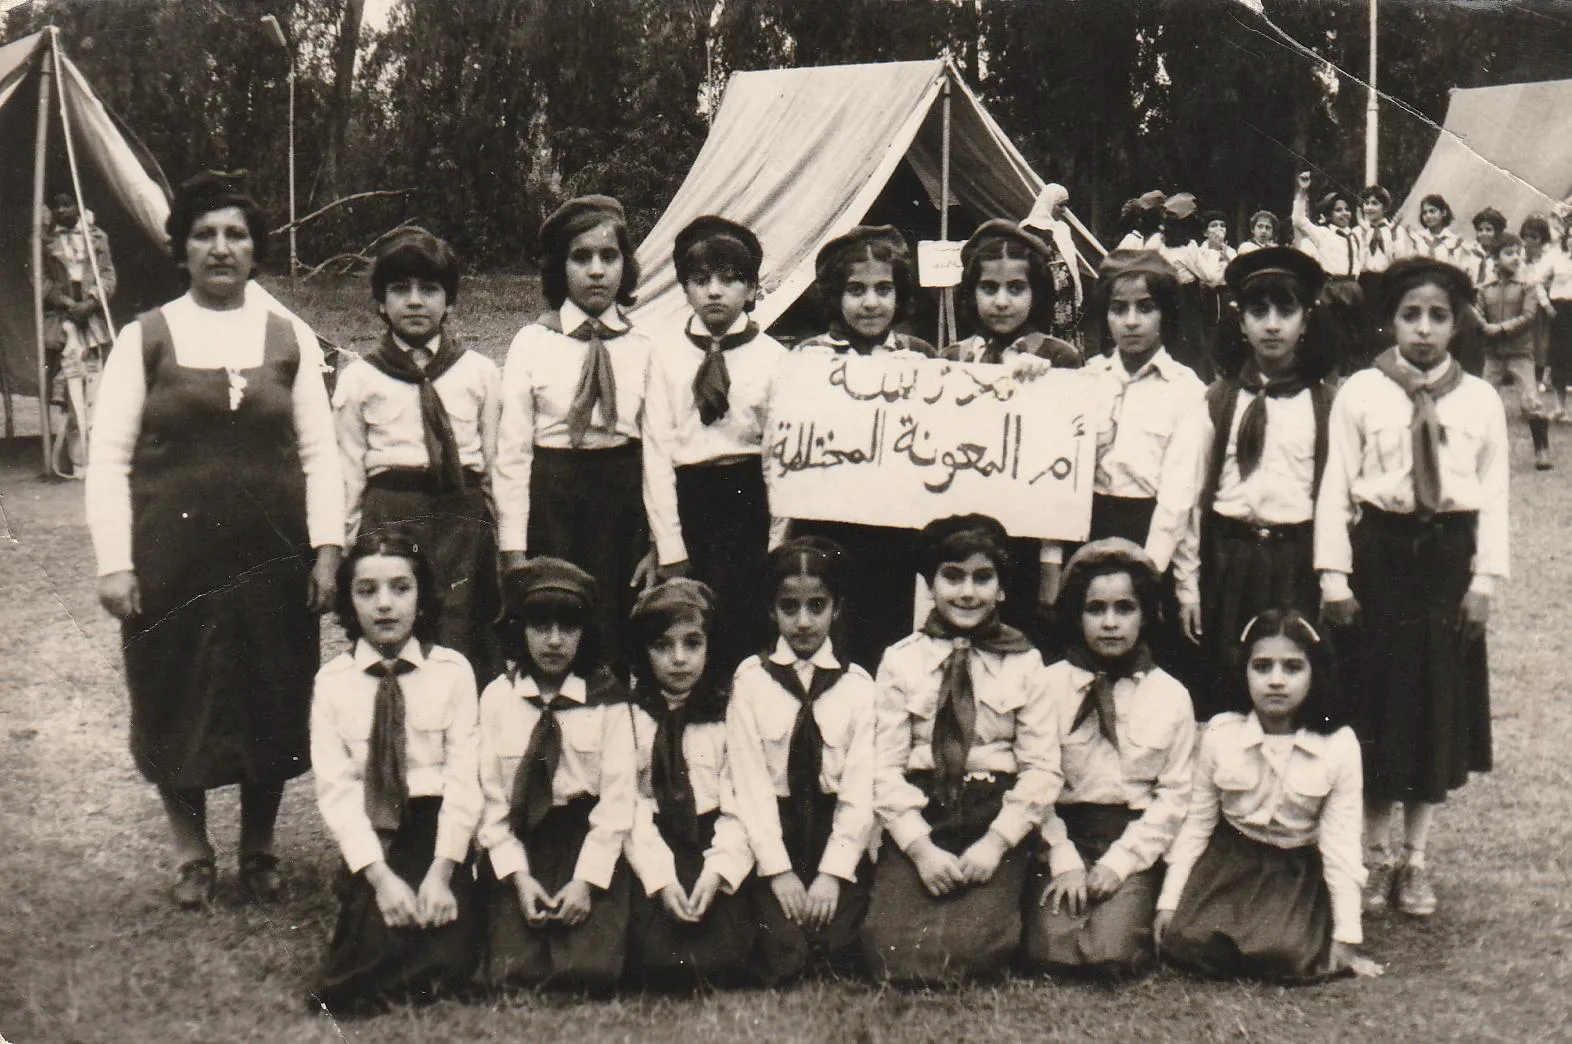 Georgena Habbaba pictured circa 1985 in the front kneeling, third from the right with her school scout team at Our Lady of Perpetual Help Chaldean Catholic School in Mosul, Iraq. Habbaba, who now lives in the United States, said her memories of her childhood days at the school and parish are "wonderful." Credit: Photo courtesy of Georgena Habbaba